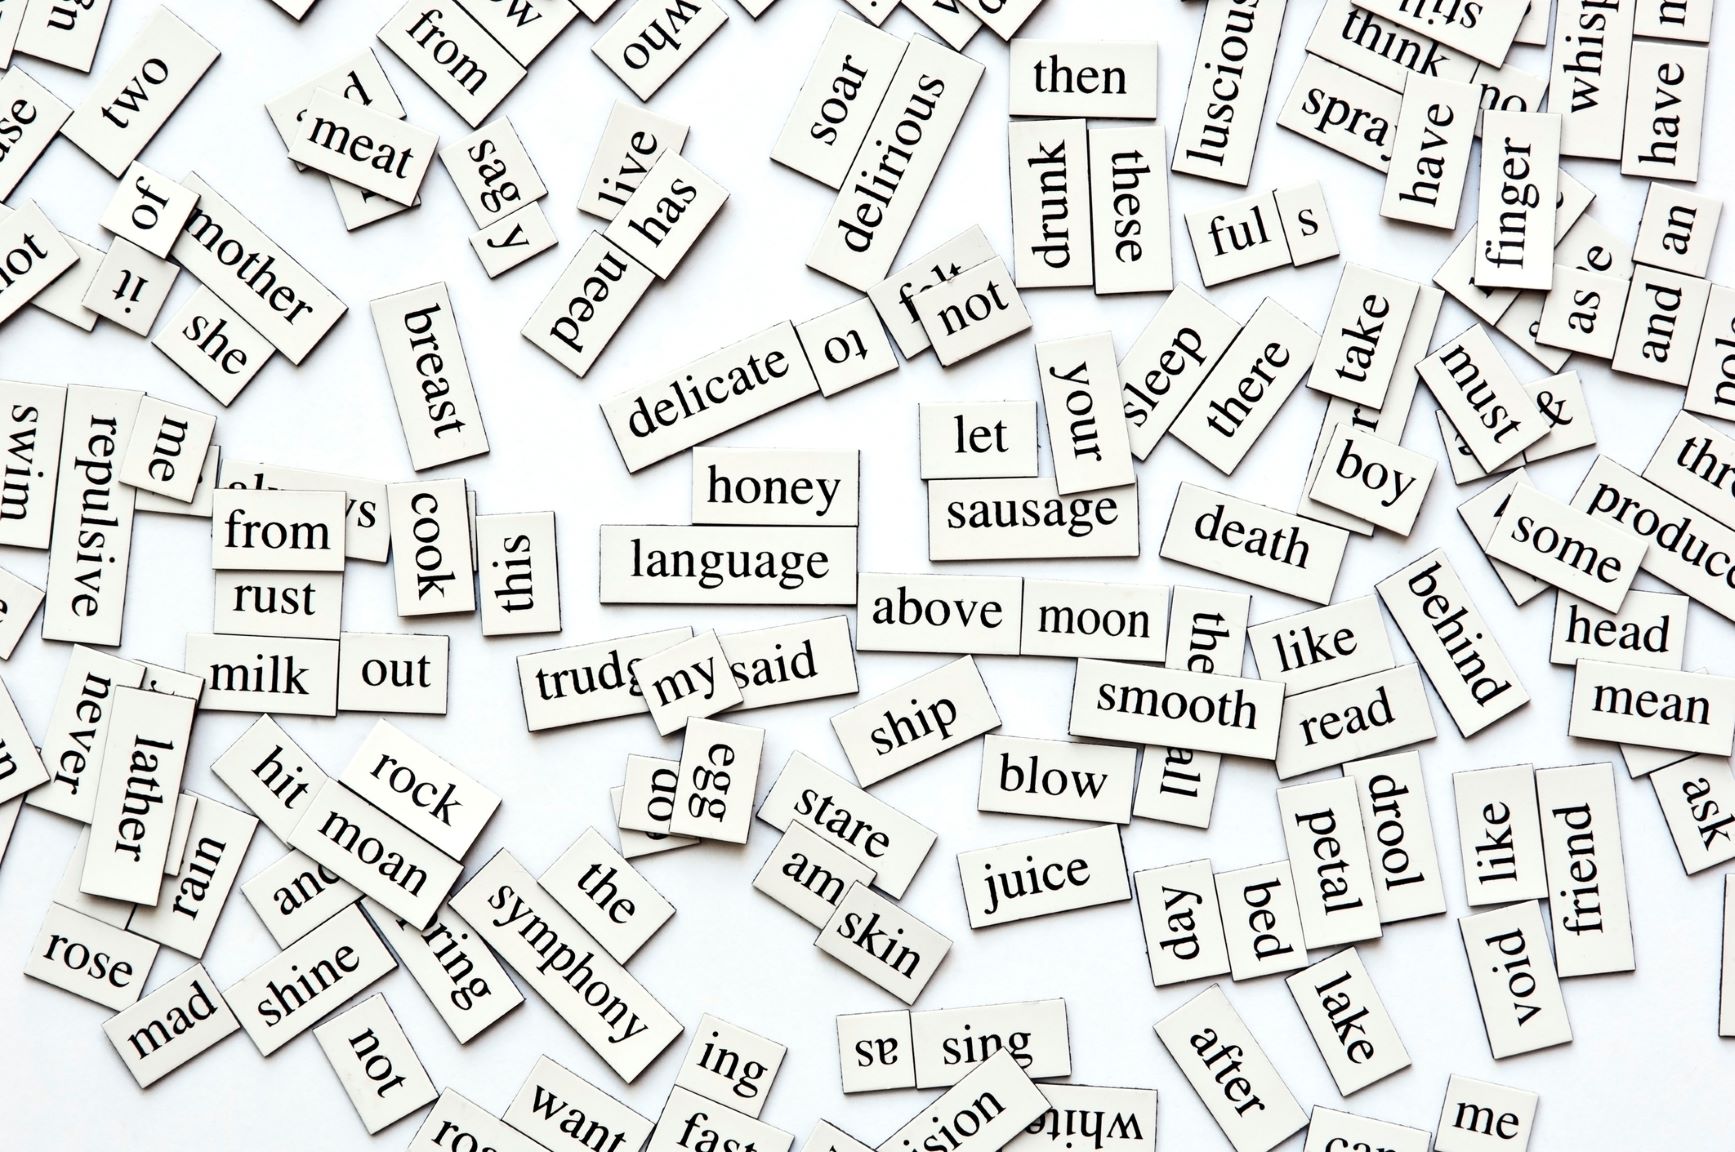 Magnetic Poetry 'MERICA America Fun Game Fridge Magnet Words Kitchen Game USA